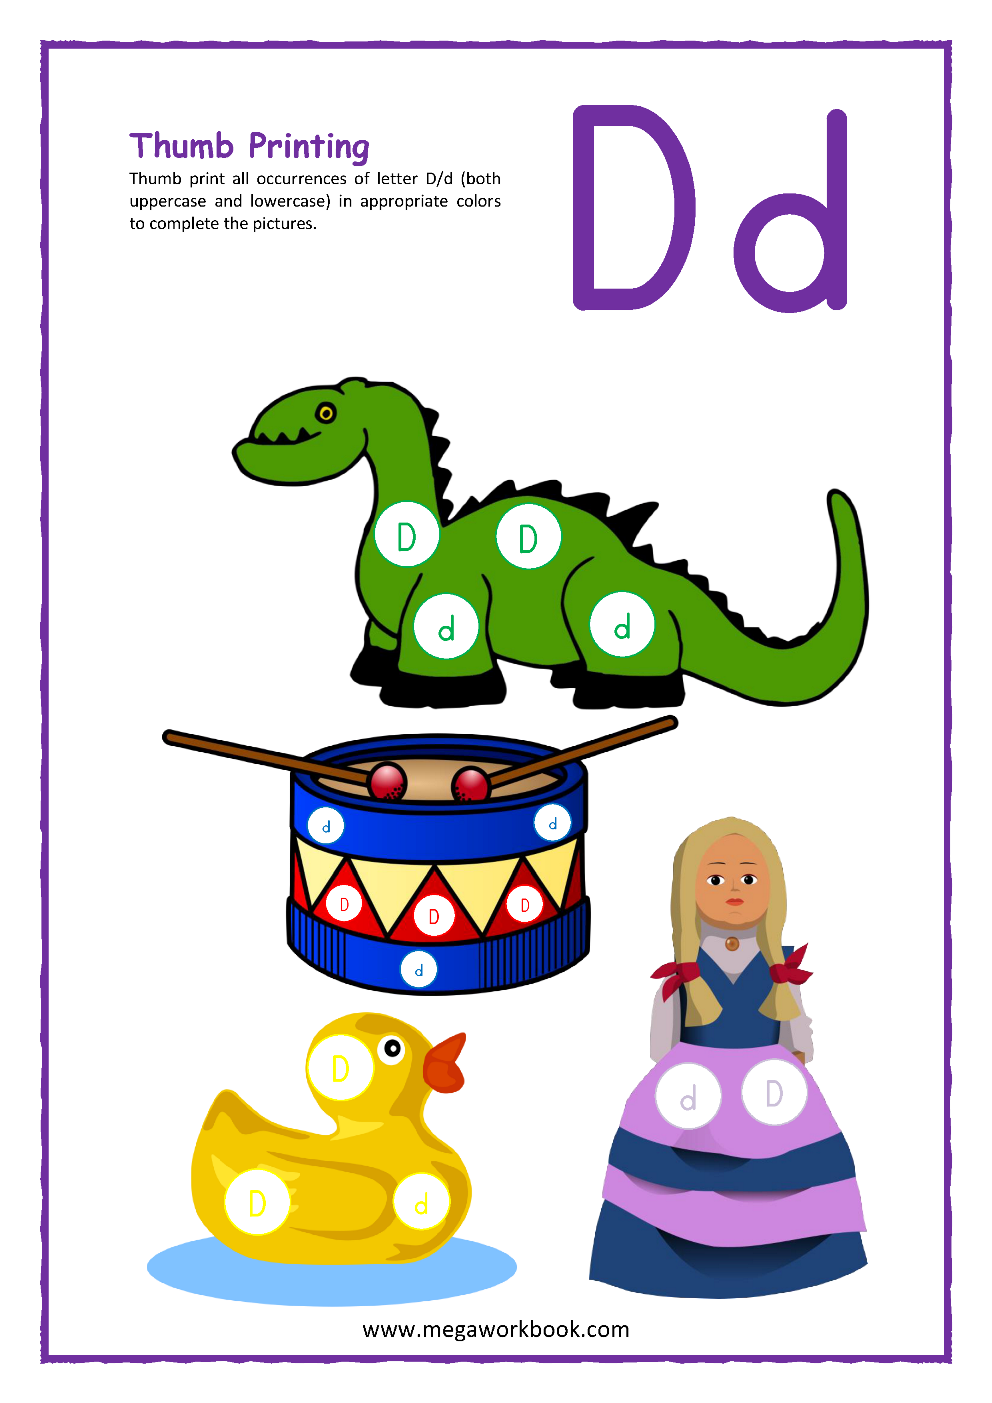 https://www.megaworkbook.com/images/content/English/Letter_Of_The_Week/Letter_D_Activities/Color_Paint_Stamp/Letter_D_Activity_Printable_Worksheet_Preschoolers_Thumb_Printing_Things_Starting_D.png